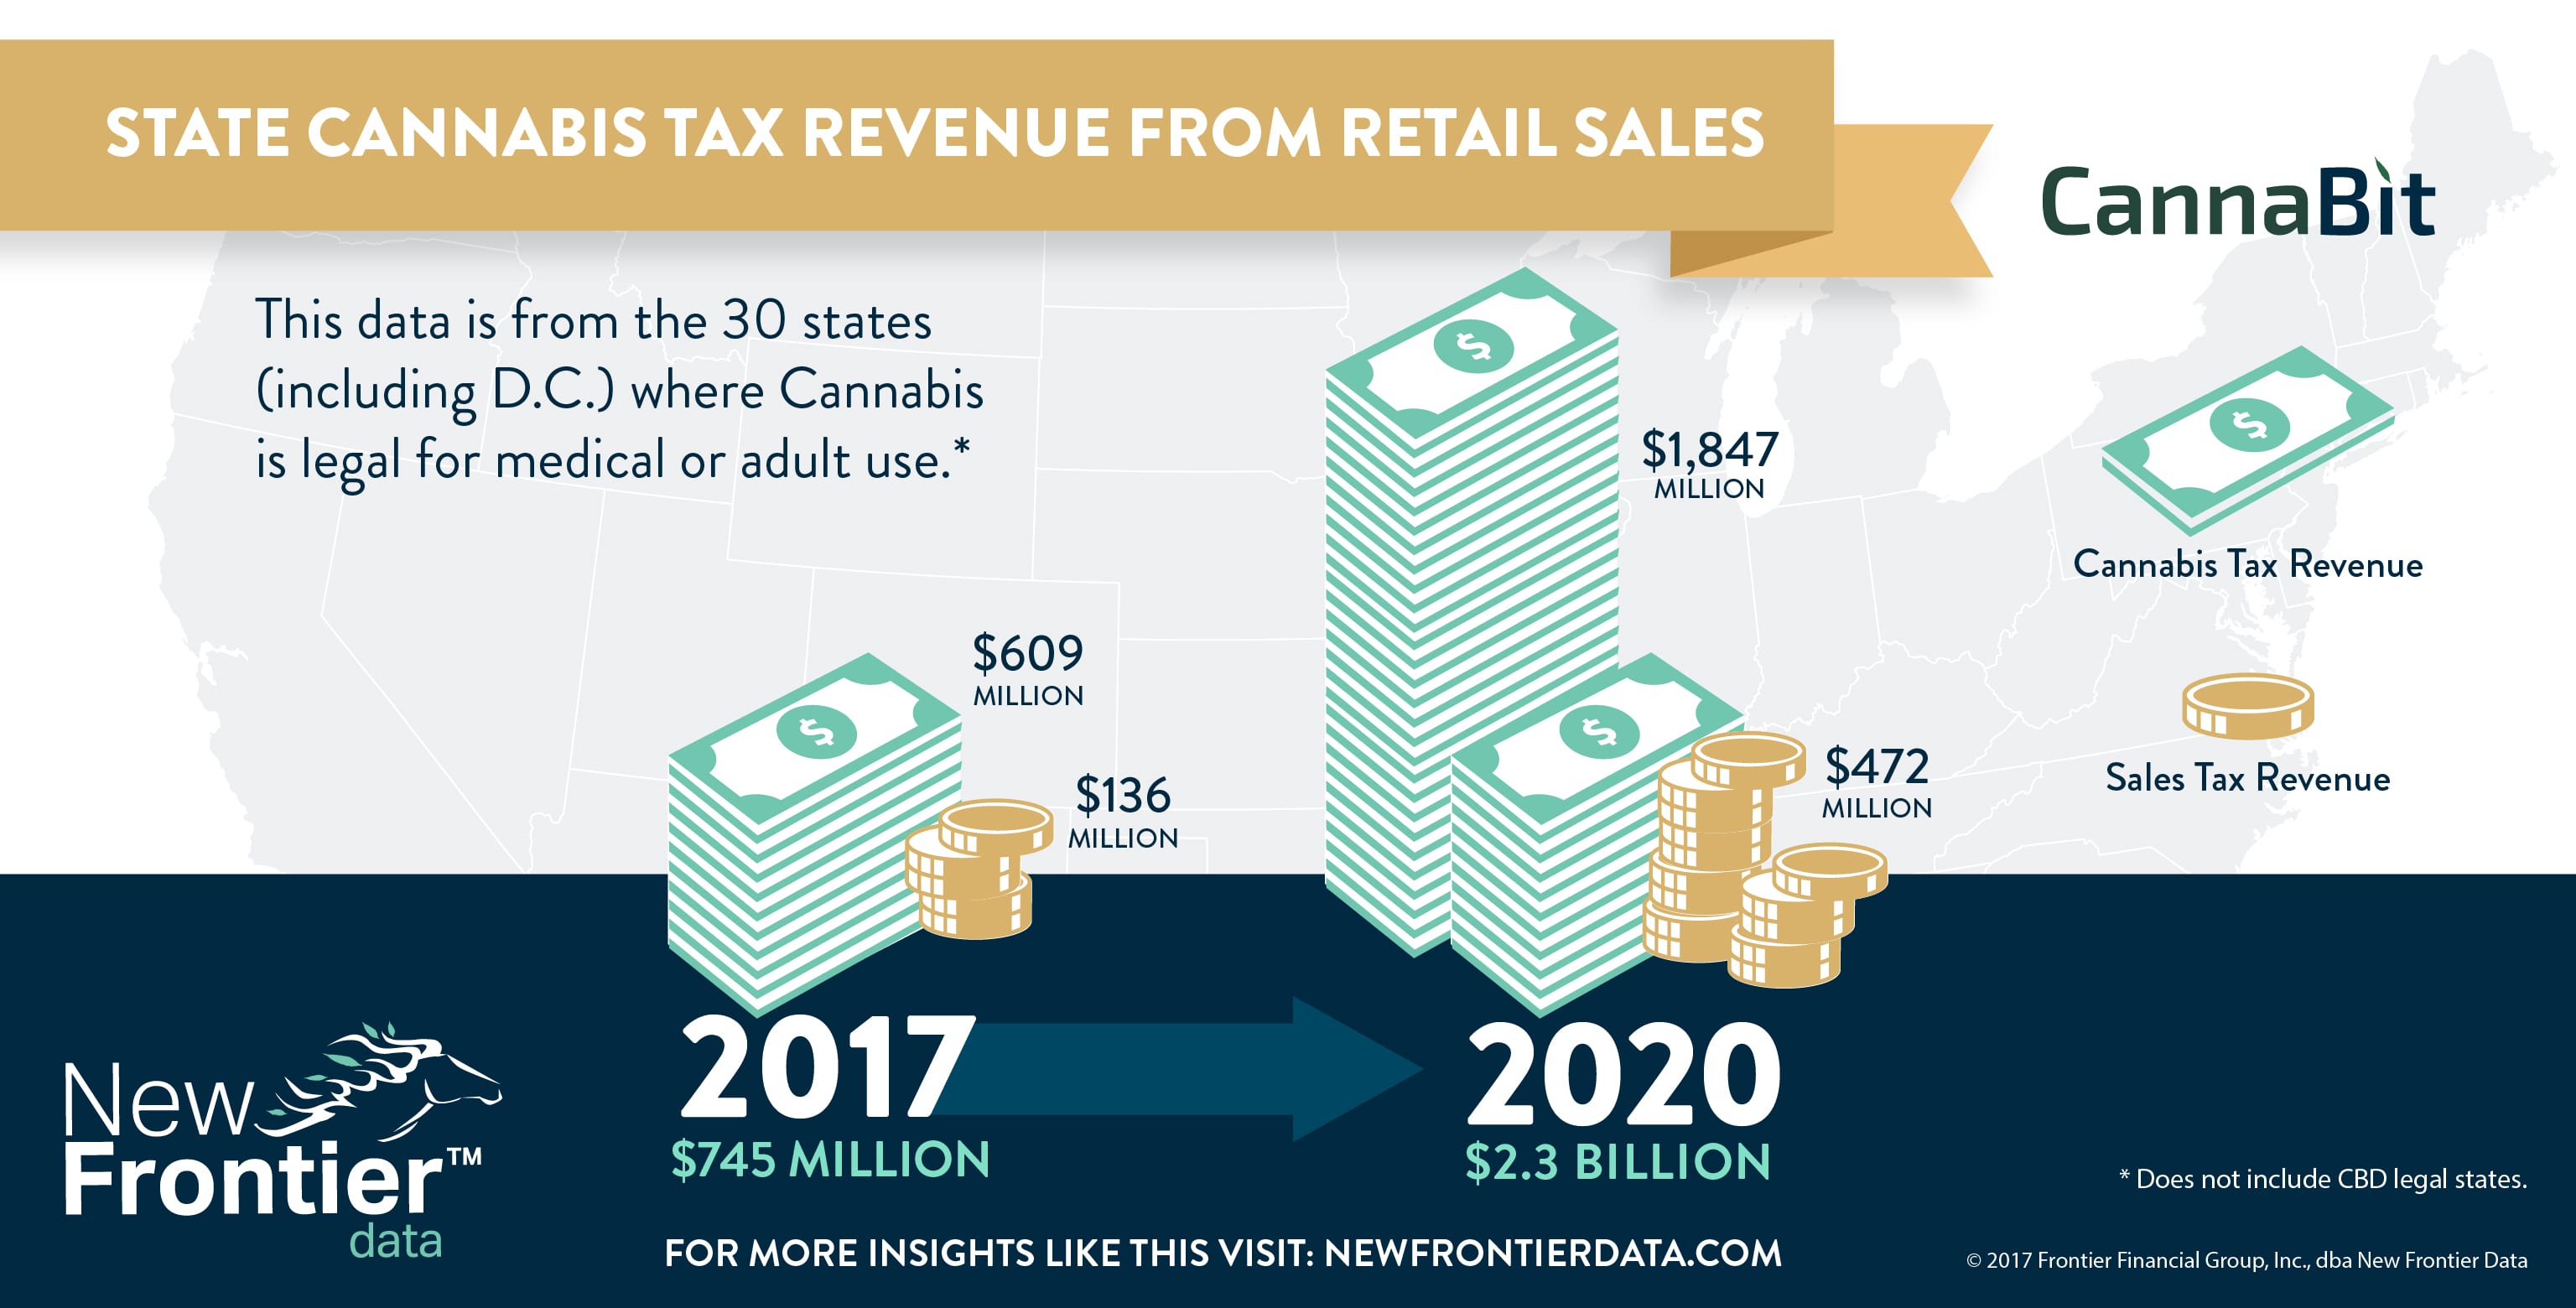 Cannabit: State Cannabis Tax Revenue From Retail Sales / 03122017